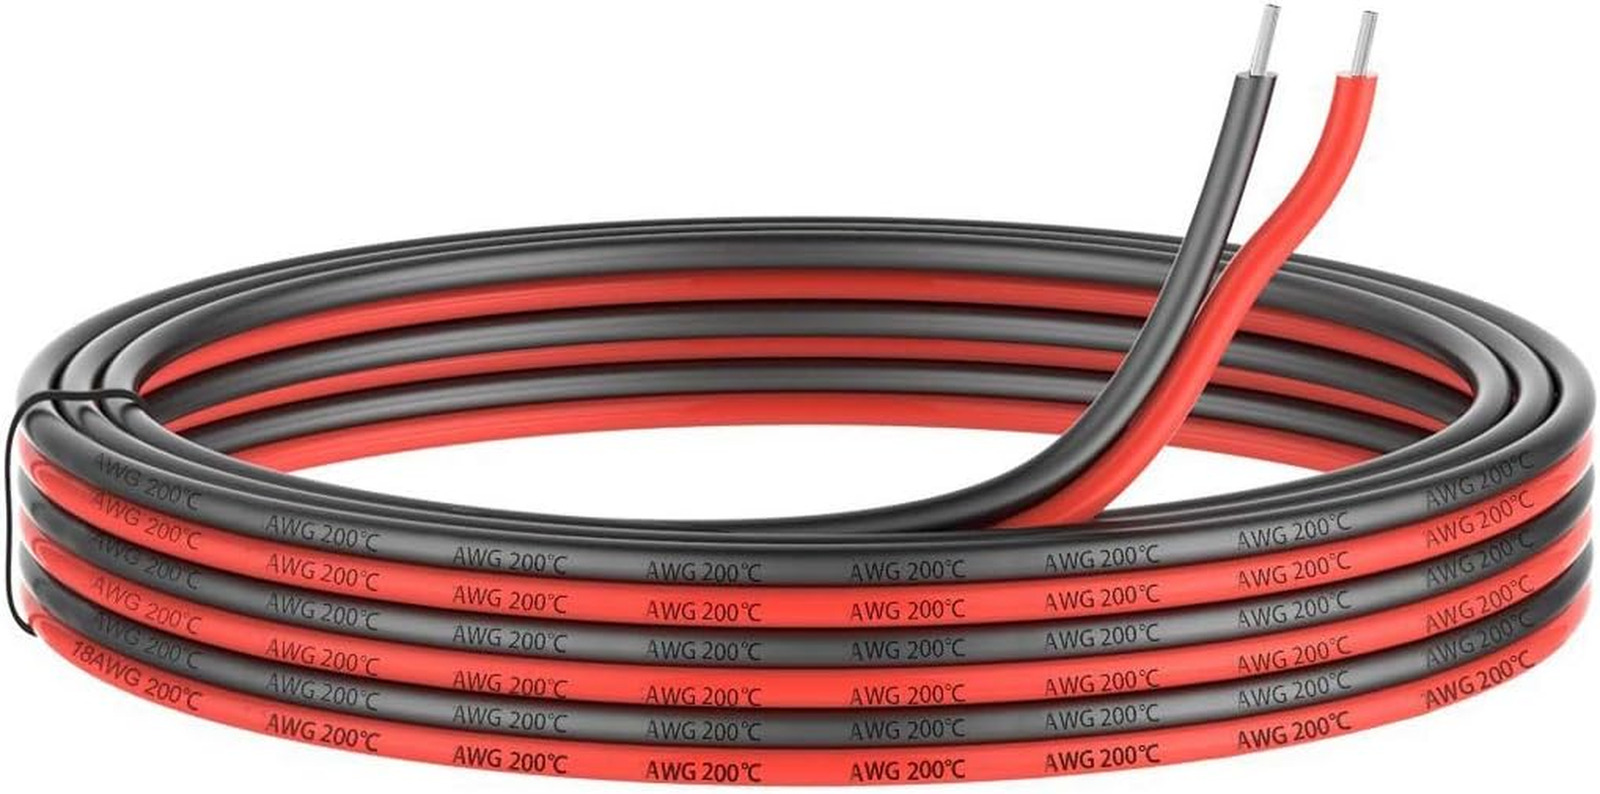 22 Gauge Silicone Electric Wire 33ft 22awg Flexible 2 Conductor Parallel Cable 2